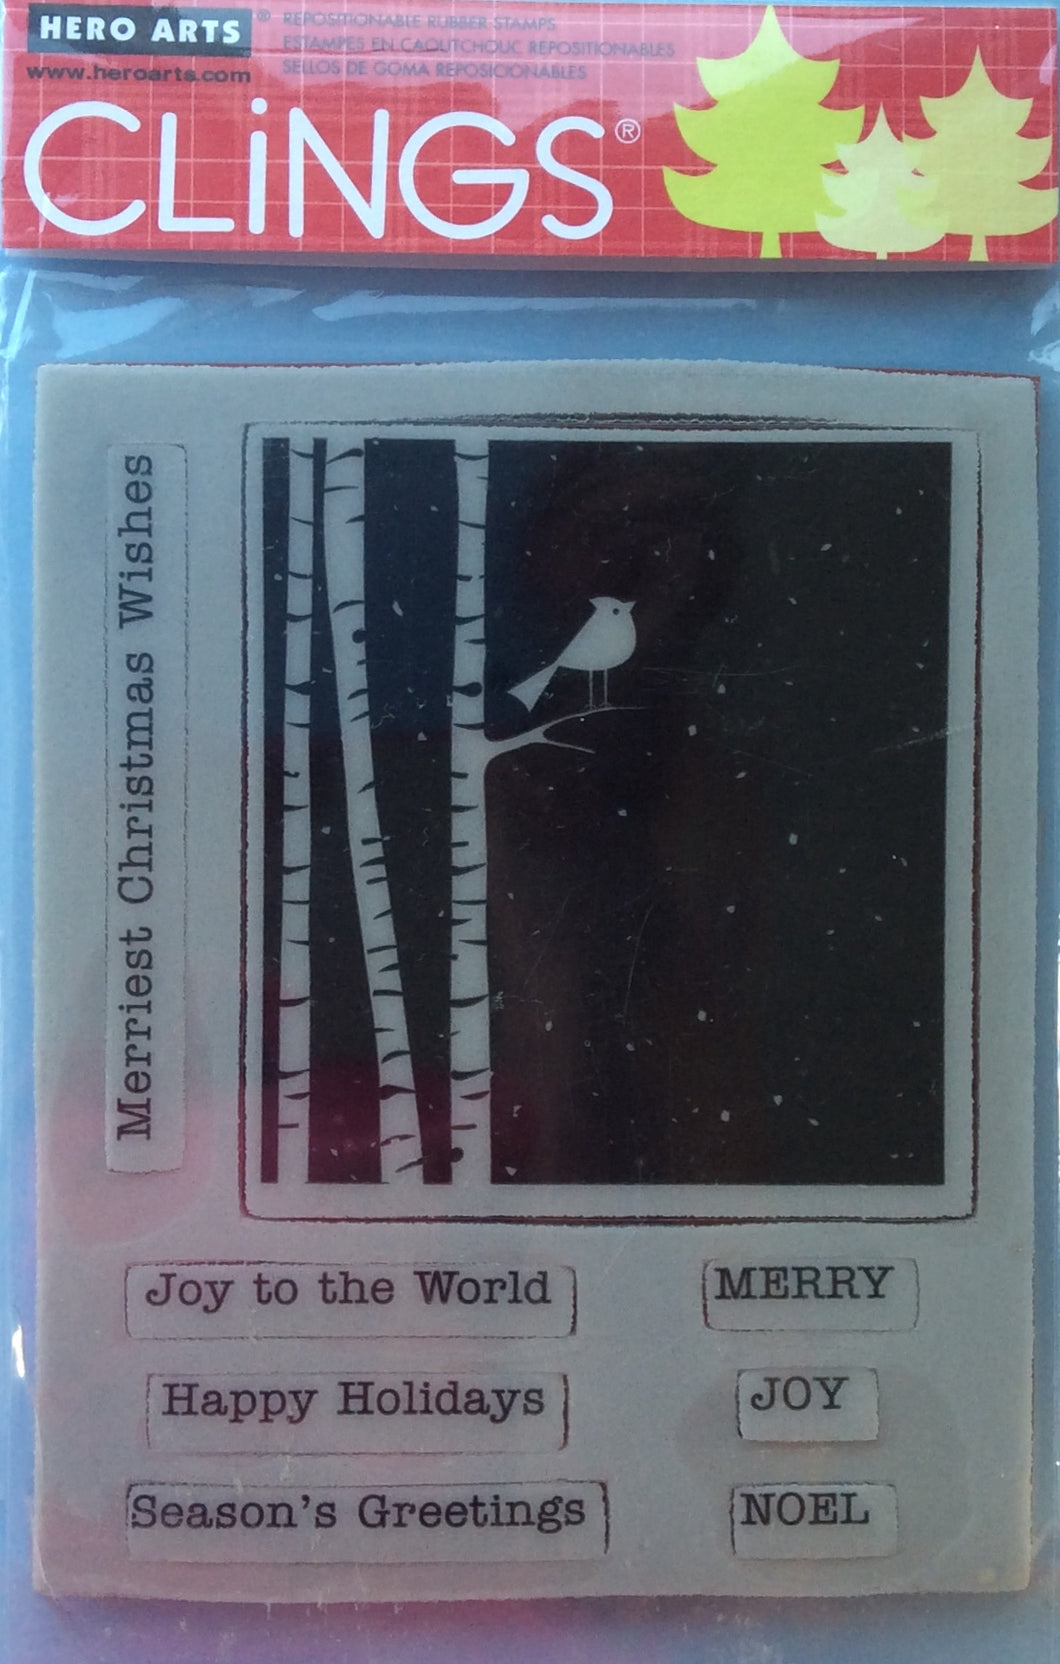 Hero Arts Clings Rubber Stamp - Merriest Christmas Wishes 12cm x 15cm